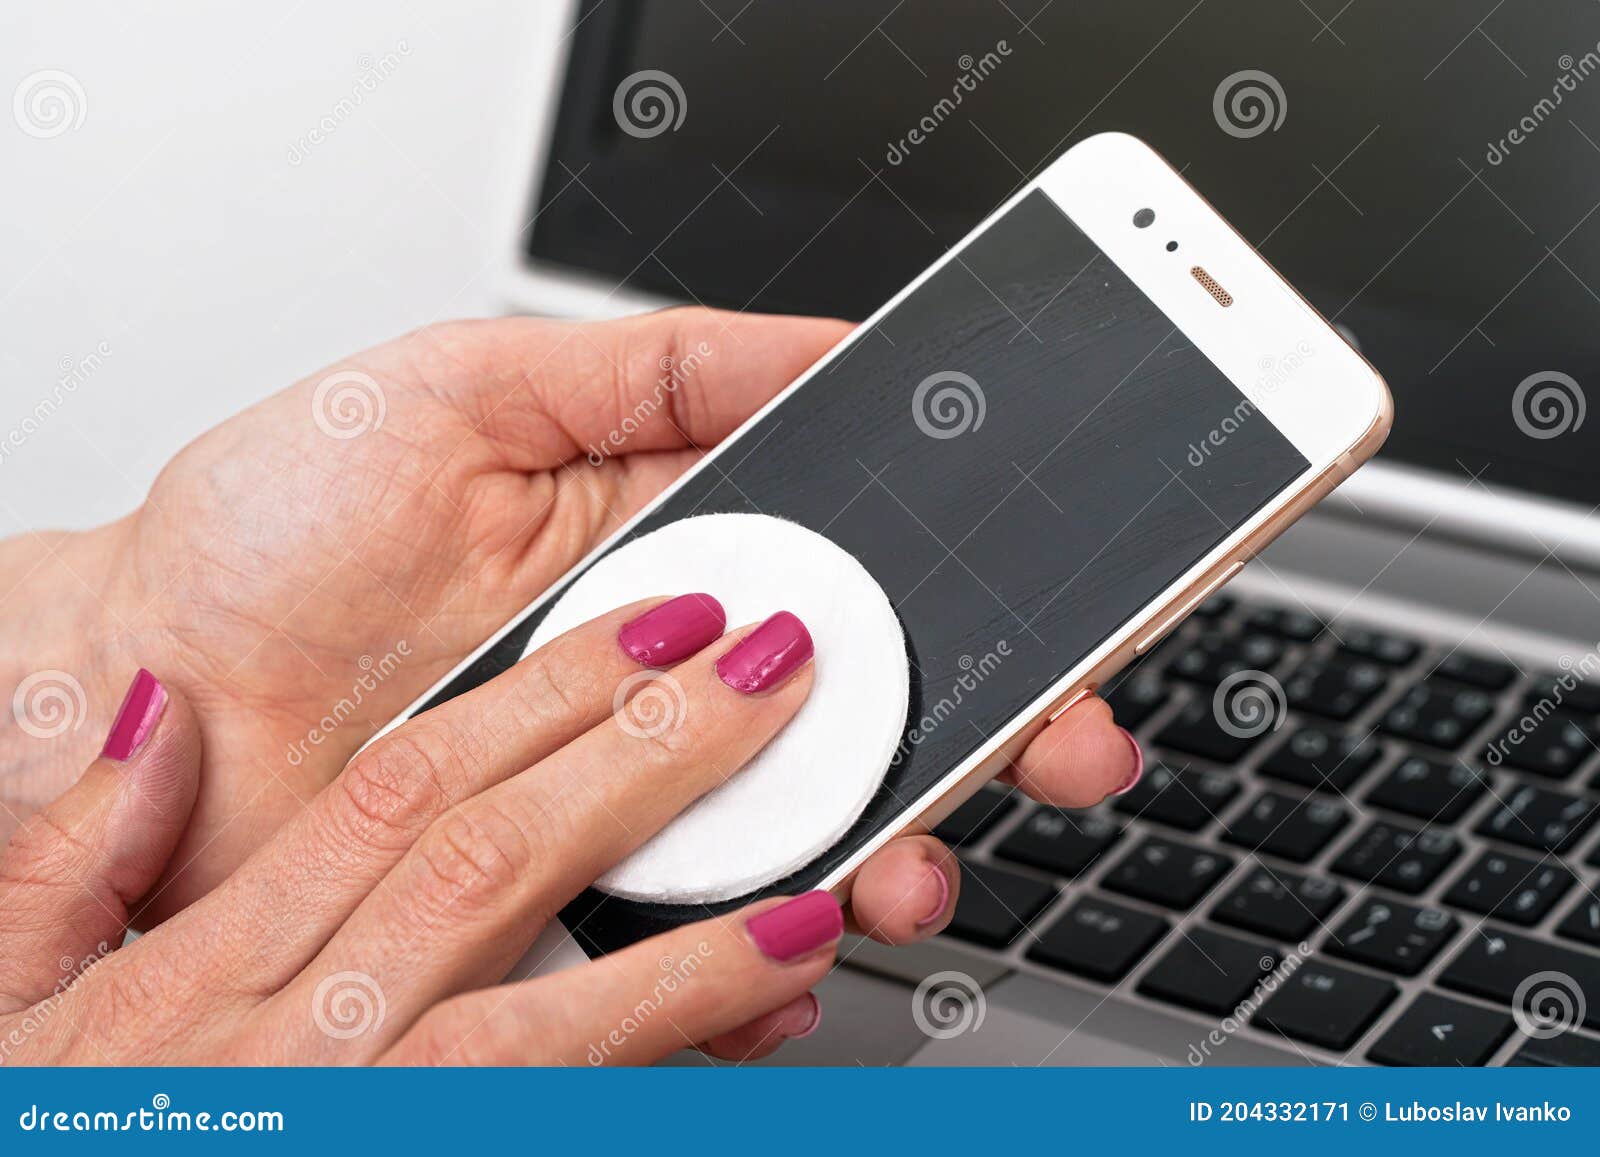 Woman Cleaning Mobile Phone with Cotton Paper Pad, Wiping Black